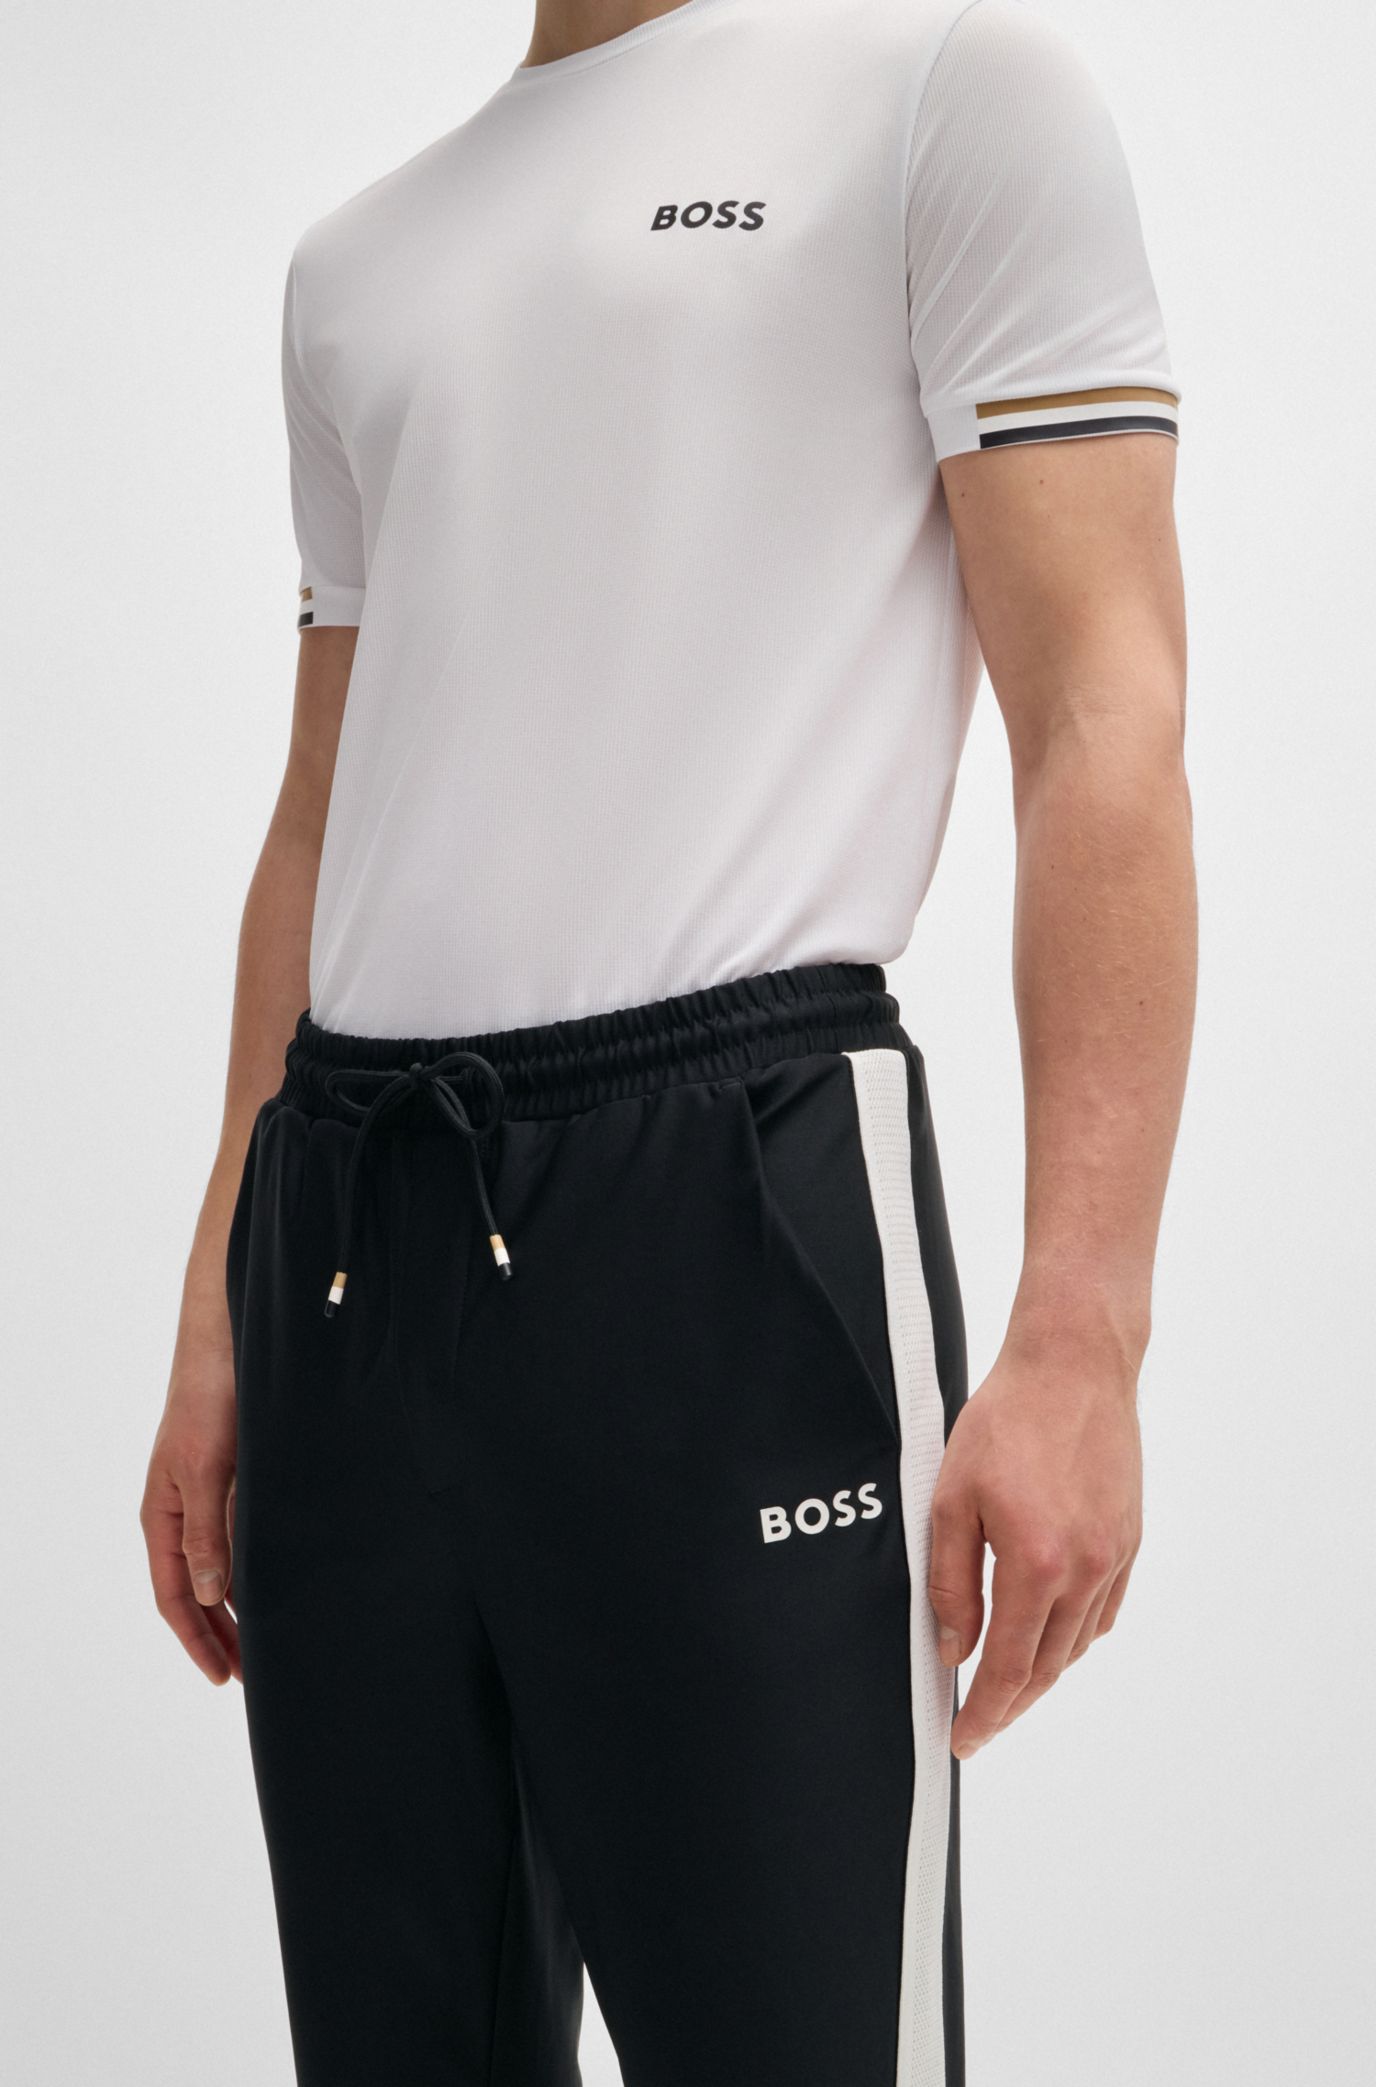 BOSS x Matteo Berrettini tracksuit bottoms with contrast tape and branding